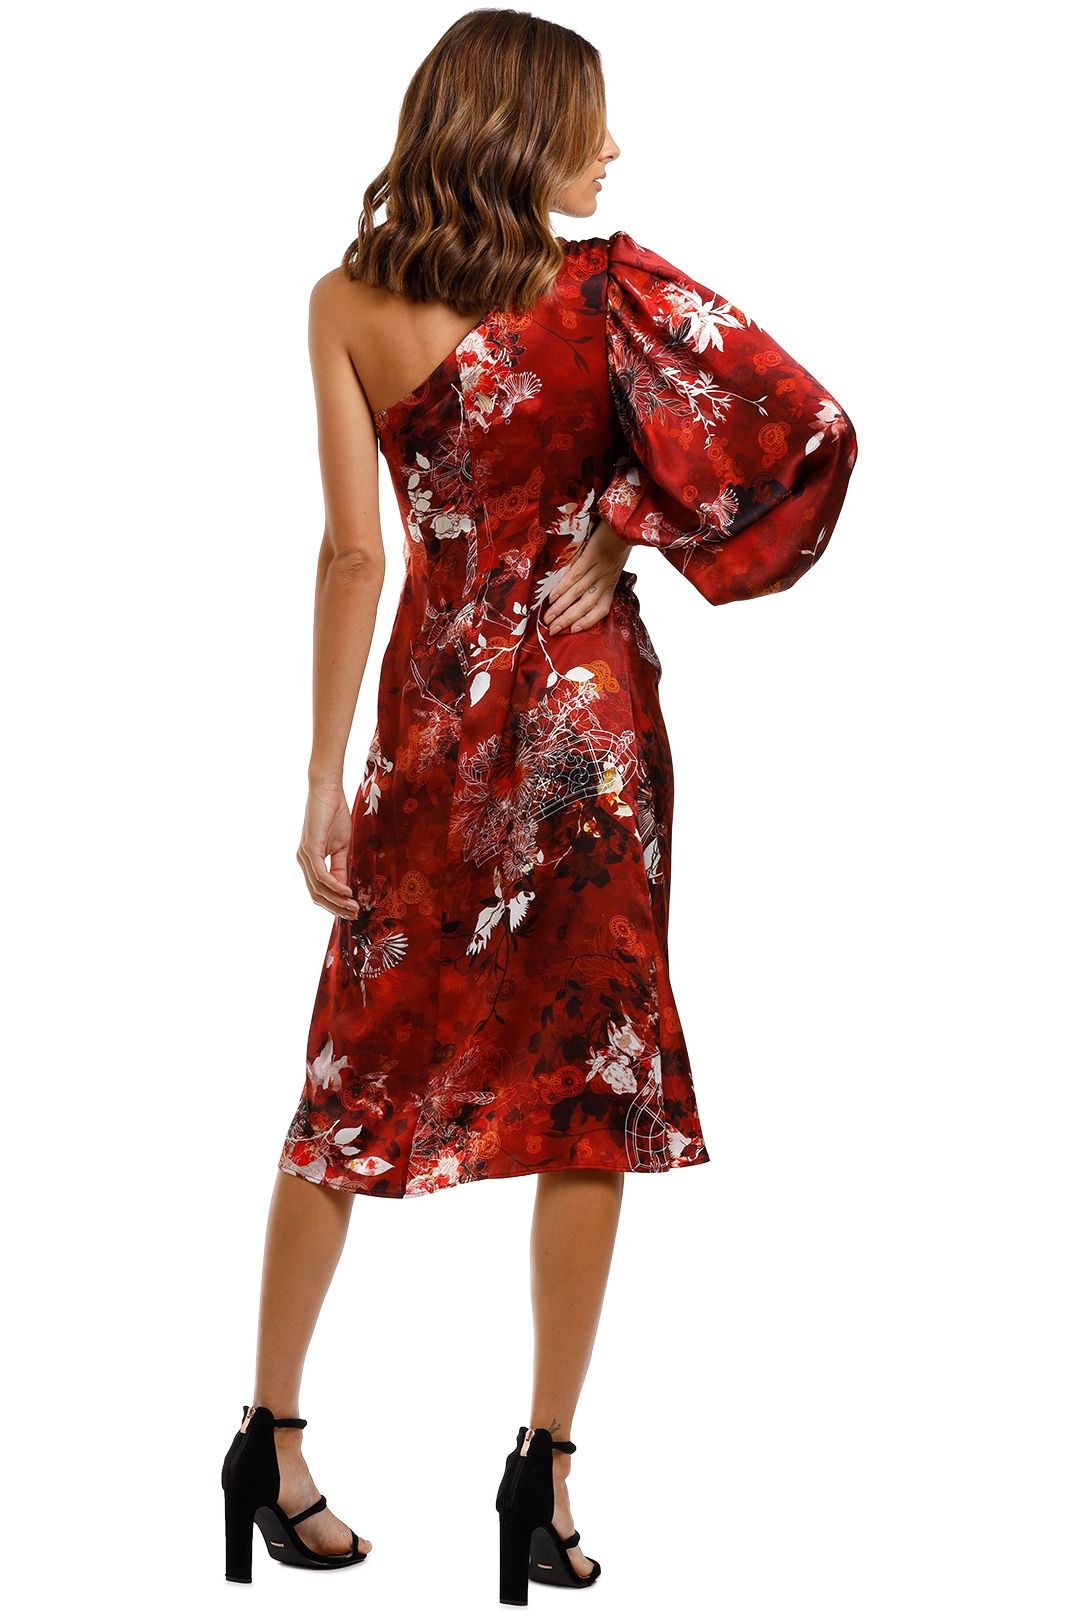 LEO & LIN Romantica Galaxy Silk Knotted Dress Red One Shoulder